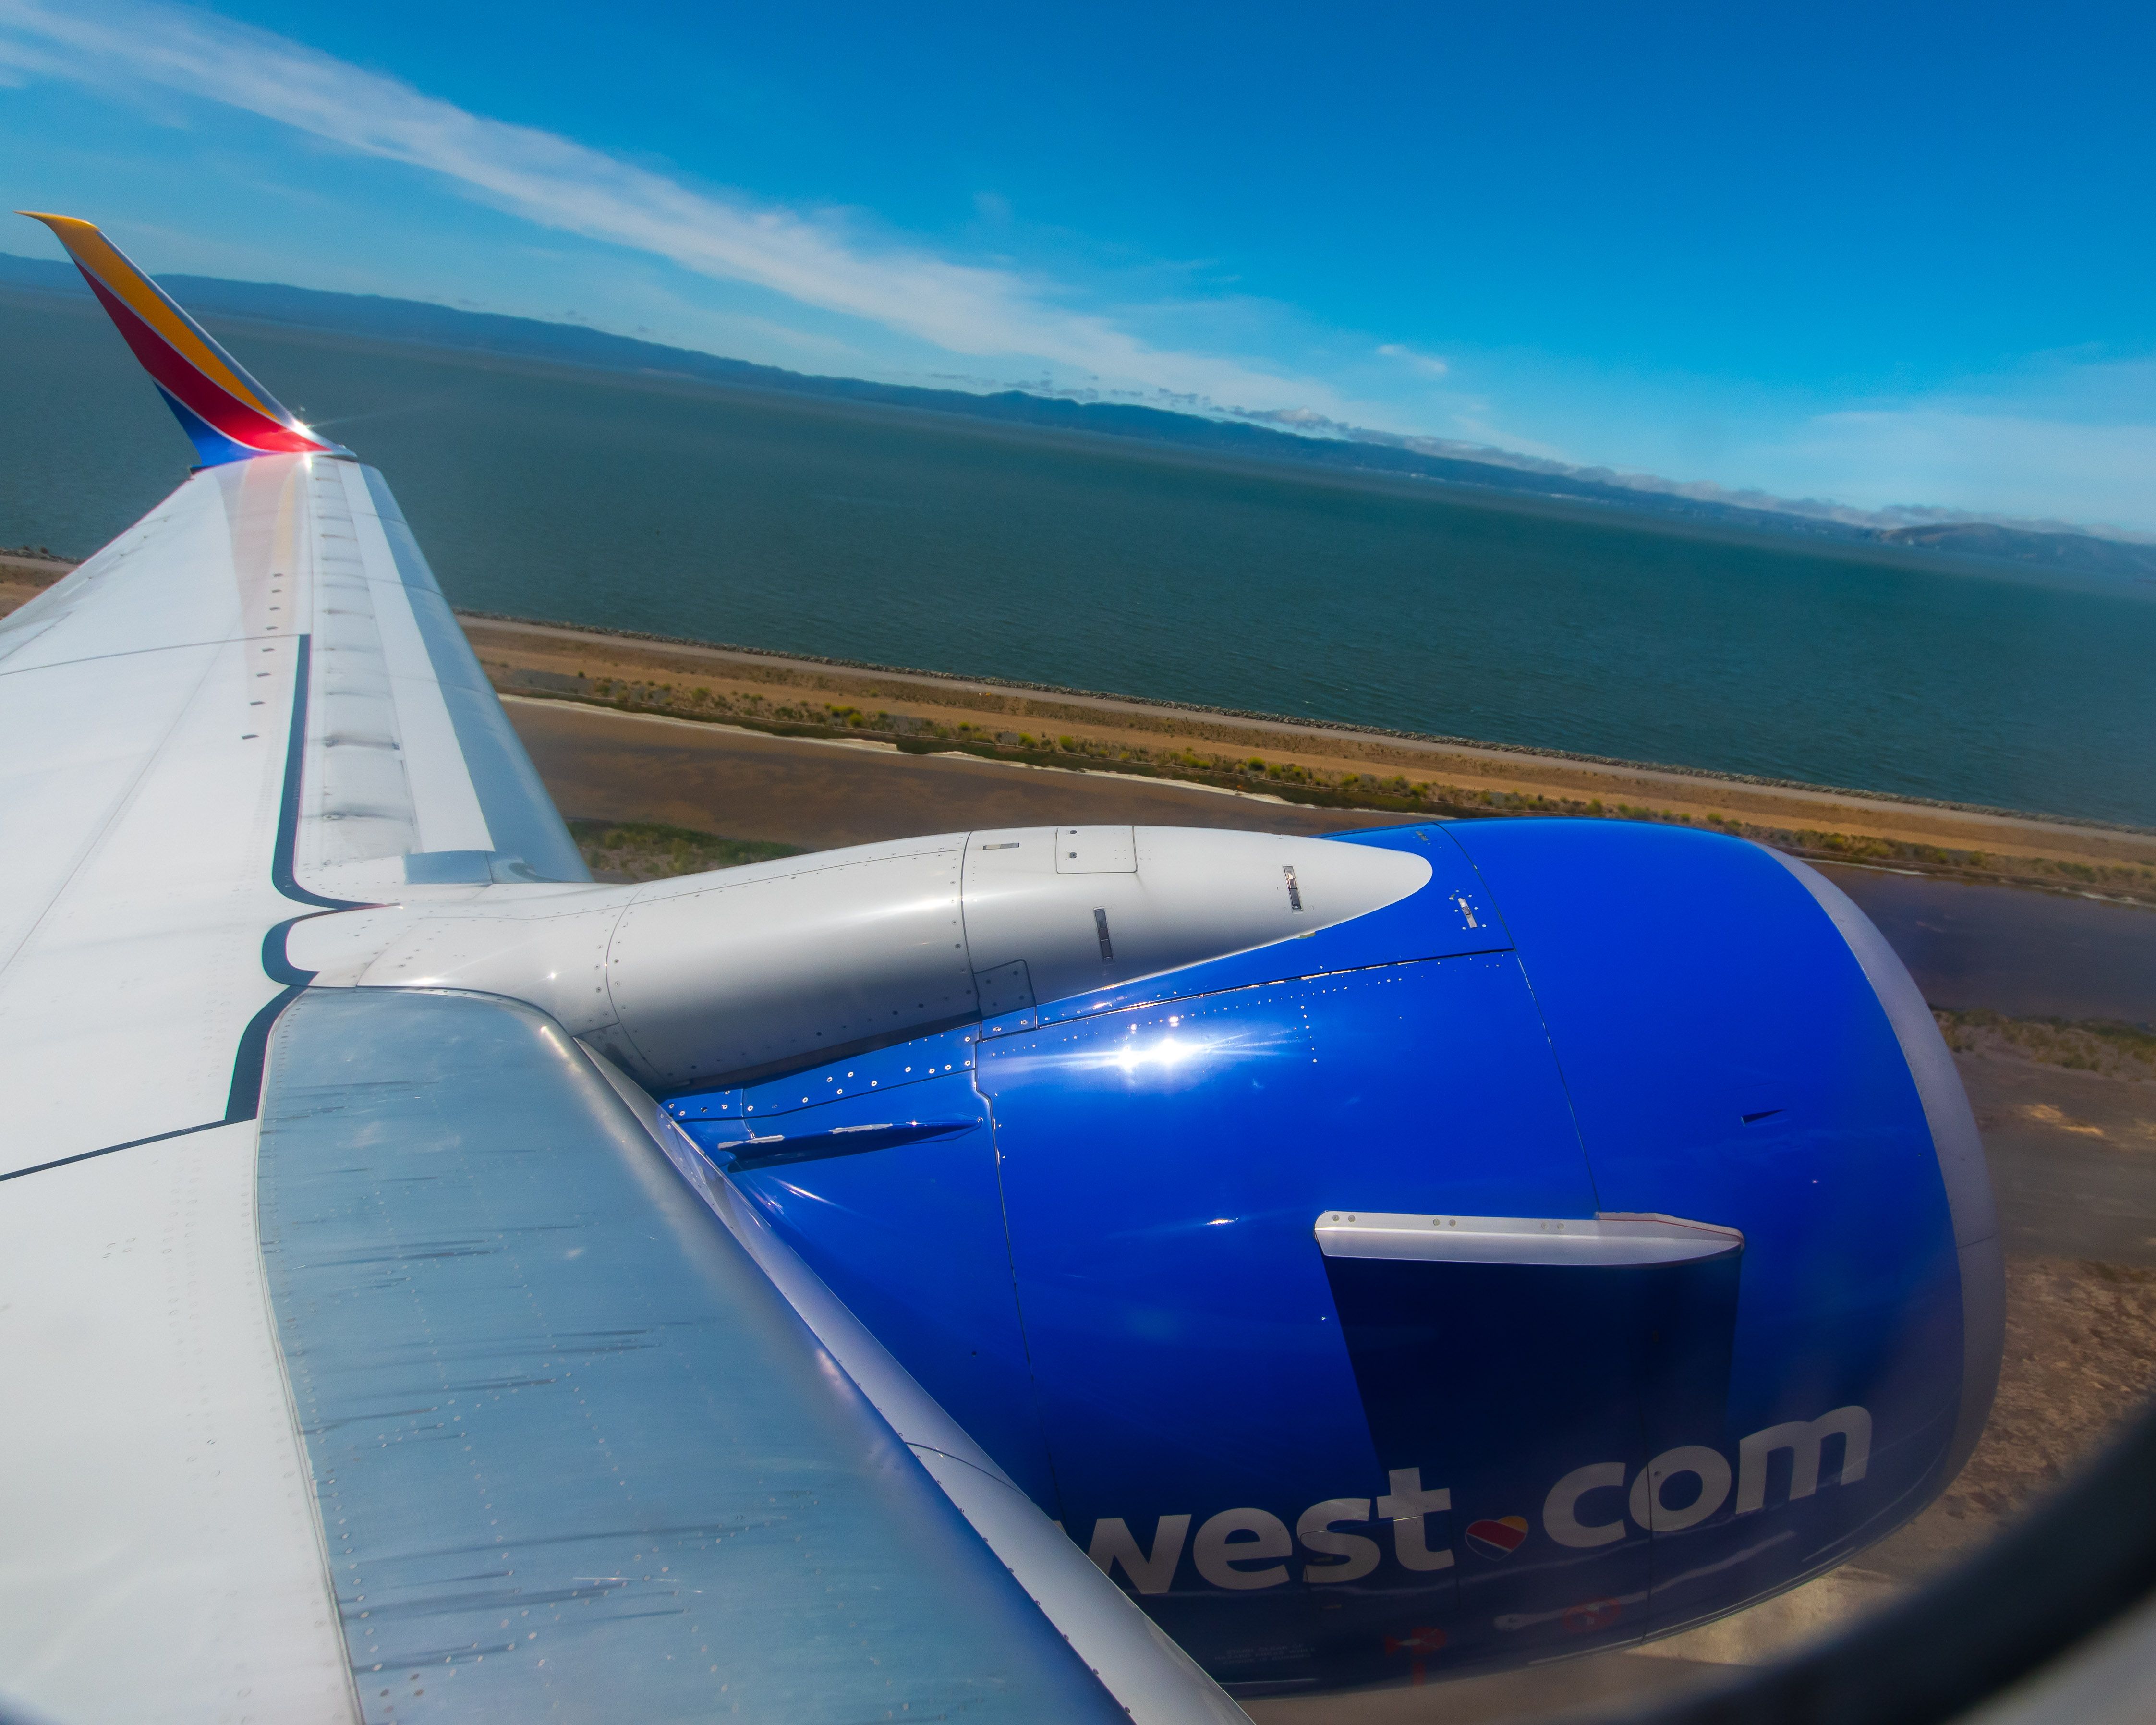 Southwest Airlines 737-800 Pulling Up from SF Bay Area